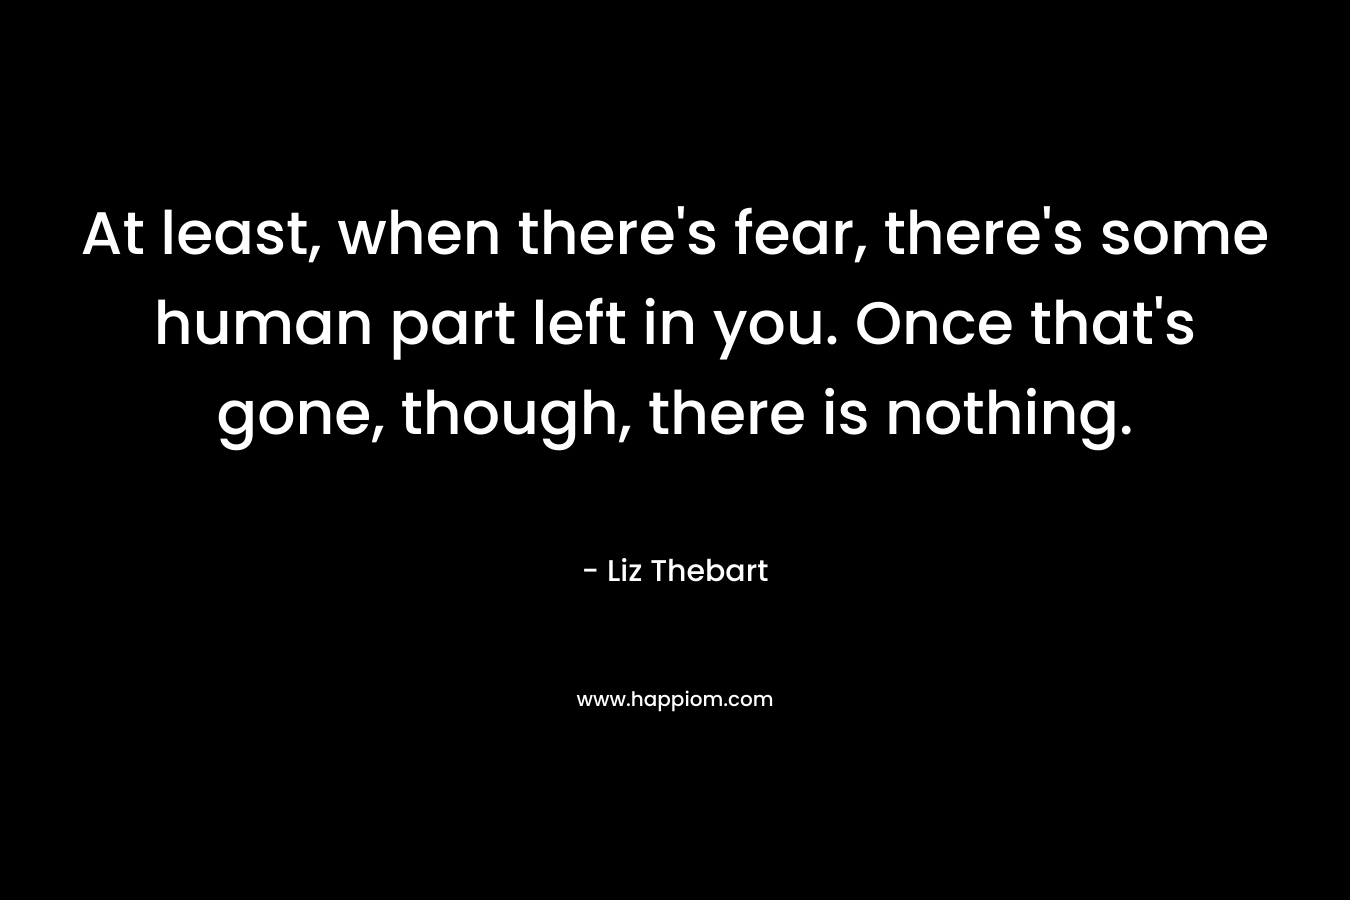 At least, when there’s fear, there’s some human part left in you. Once that’s gone, though, there is nothing. – Liz Thebart